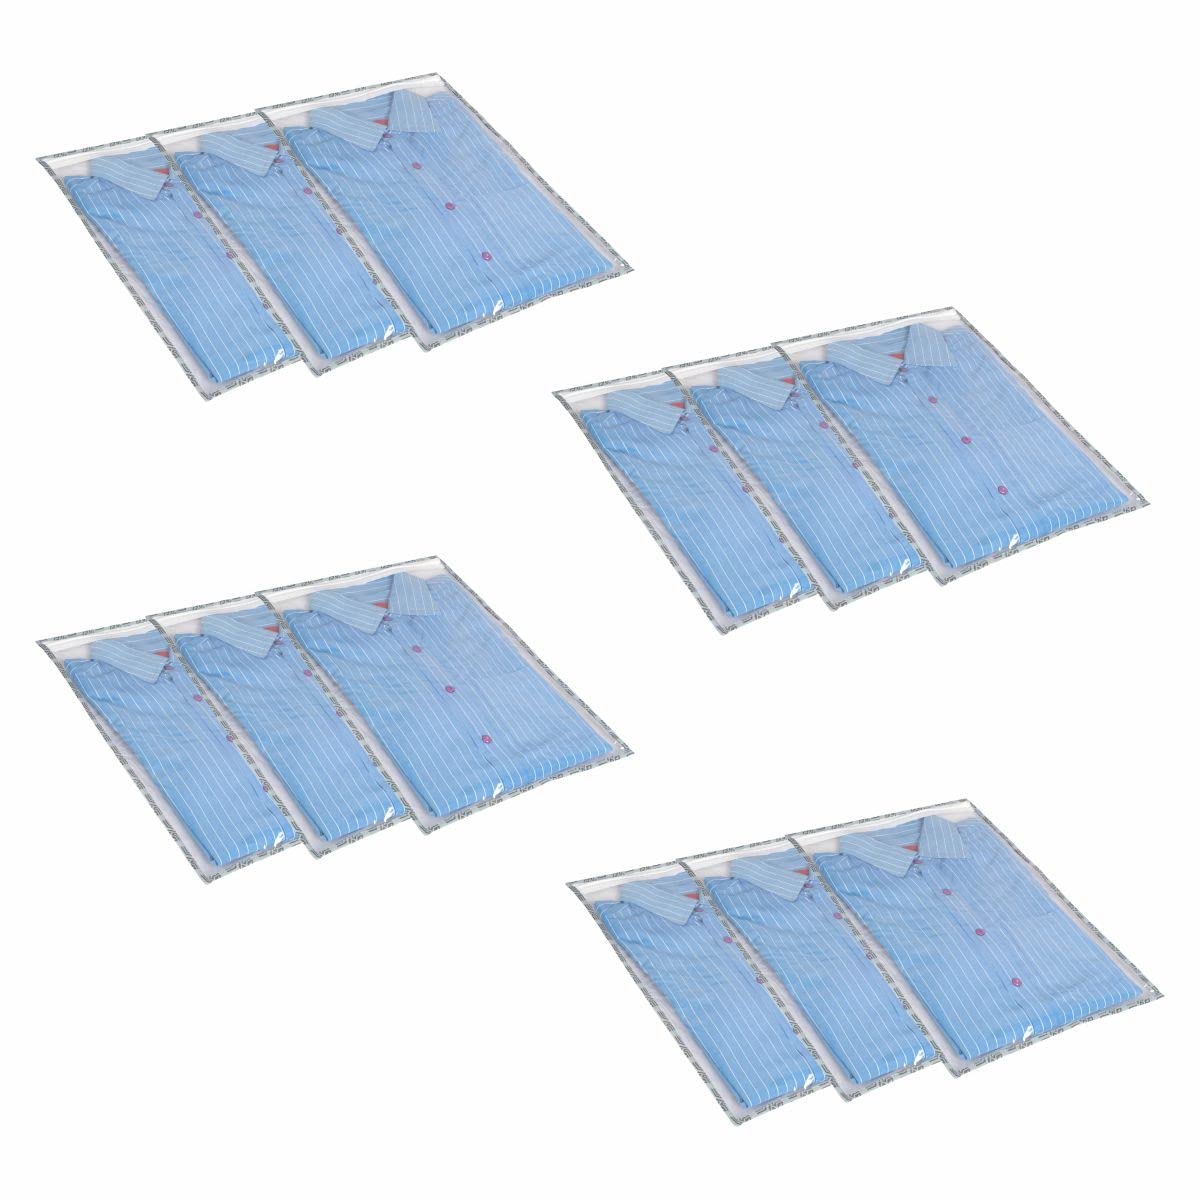 Set of 12, Transparent Single Shirt Cover with Zip Closure